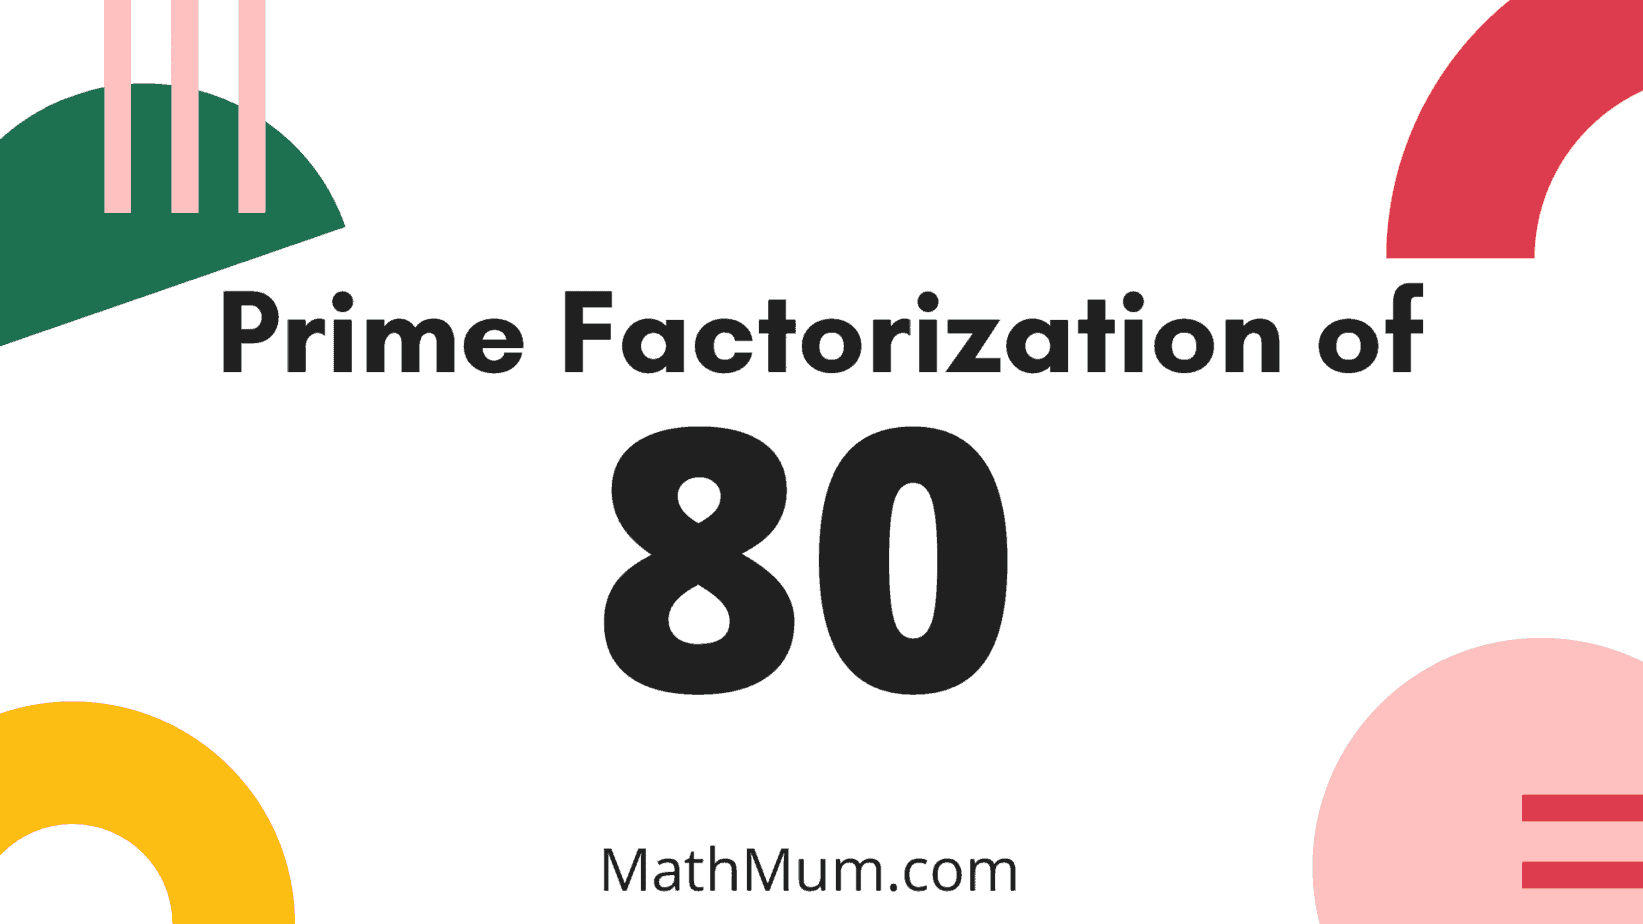 prime-factorization-of-80-can-be-done-this-fast